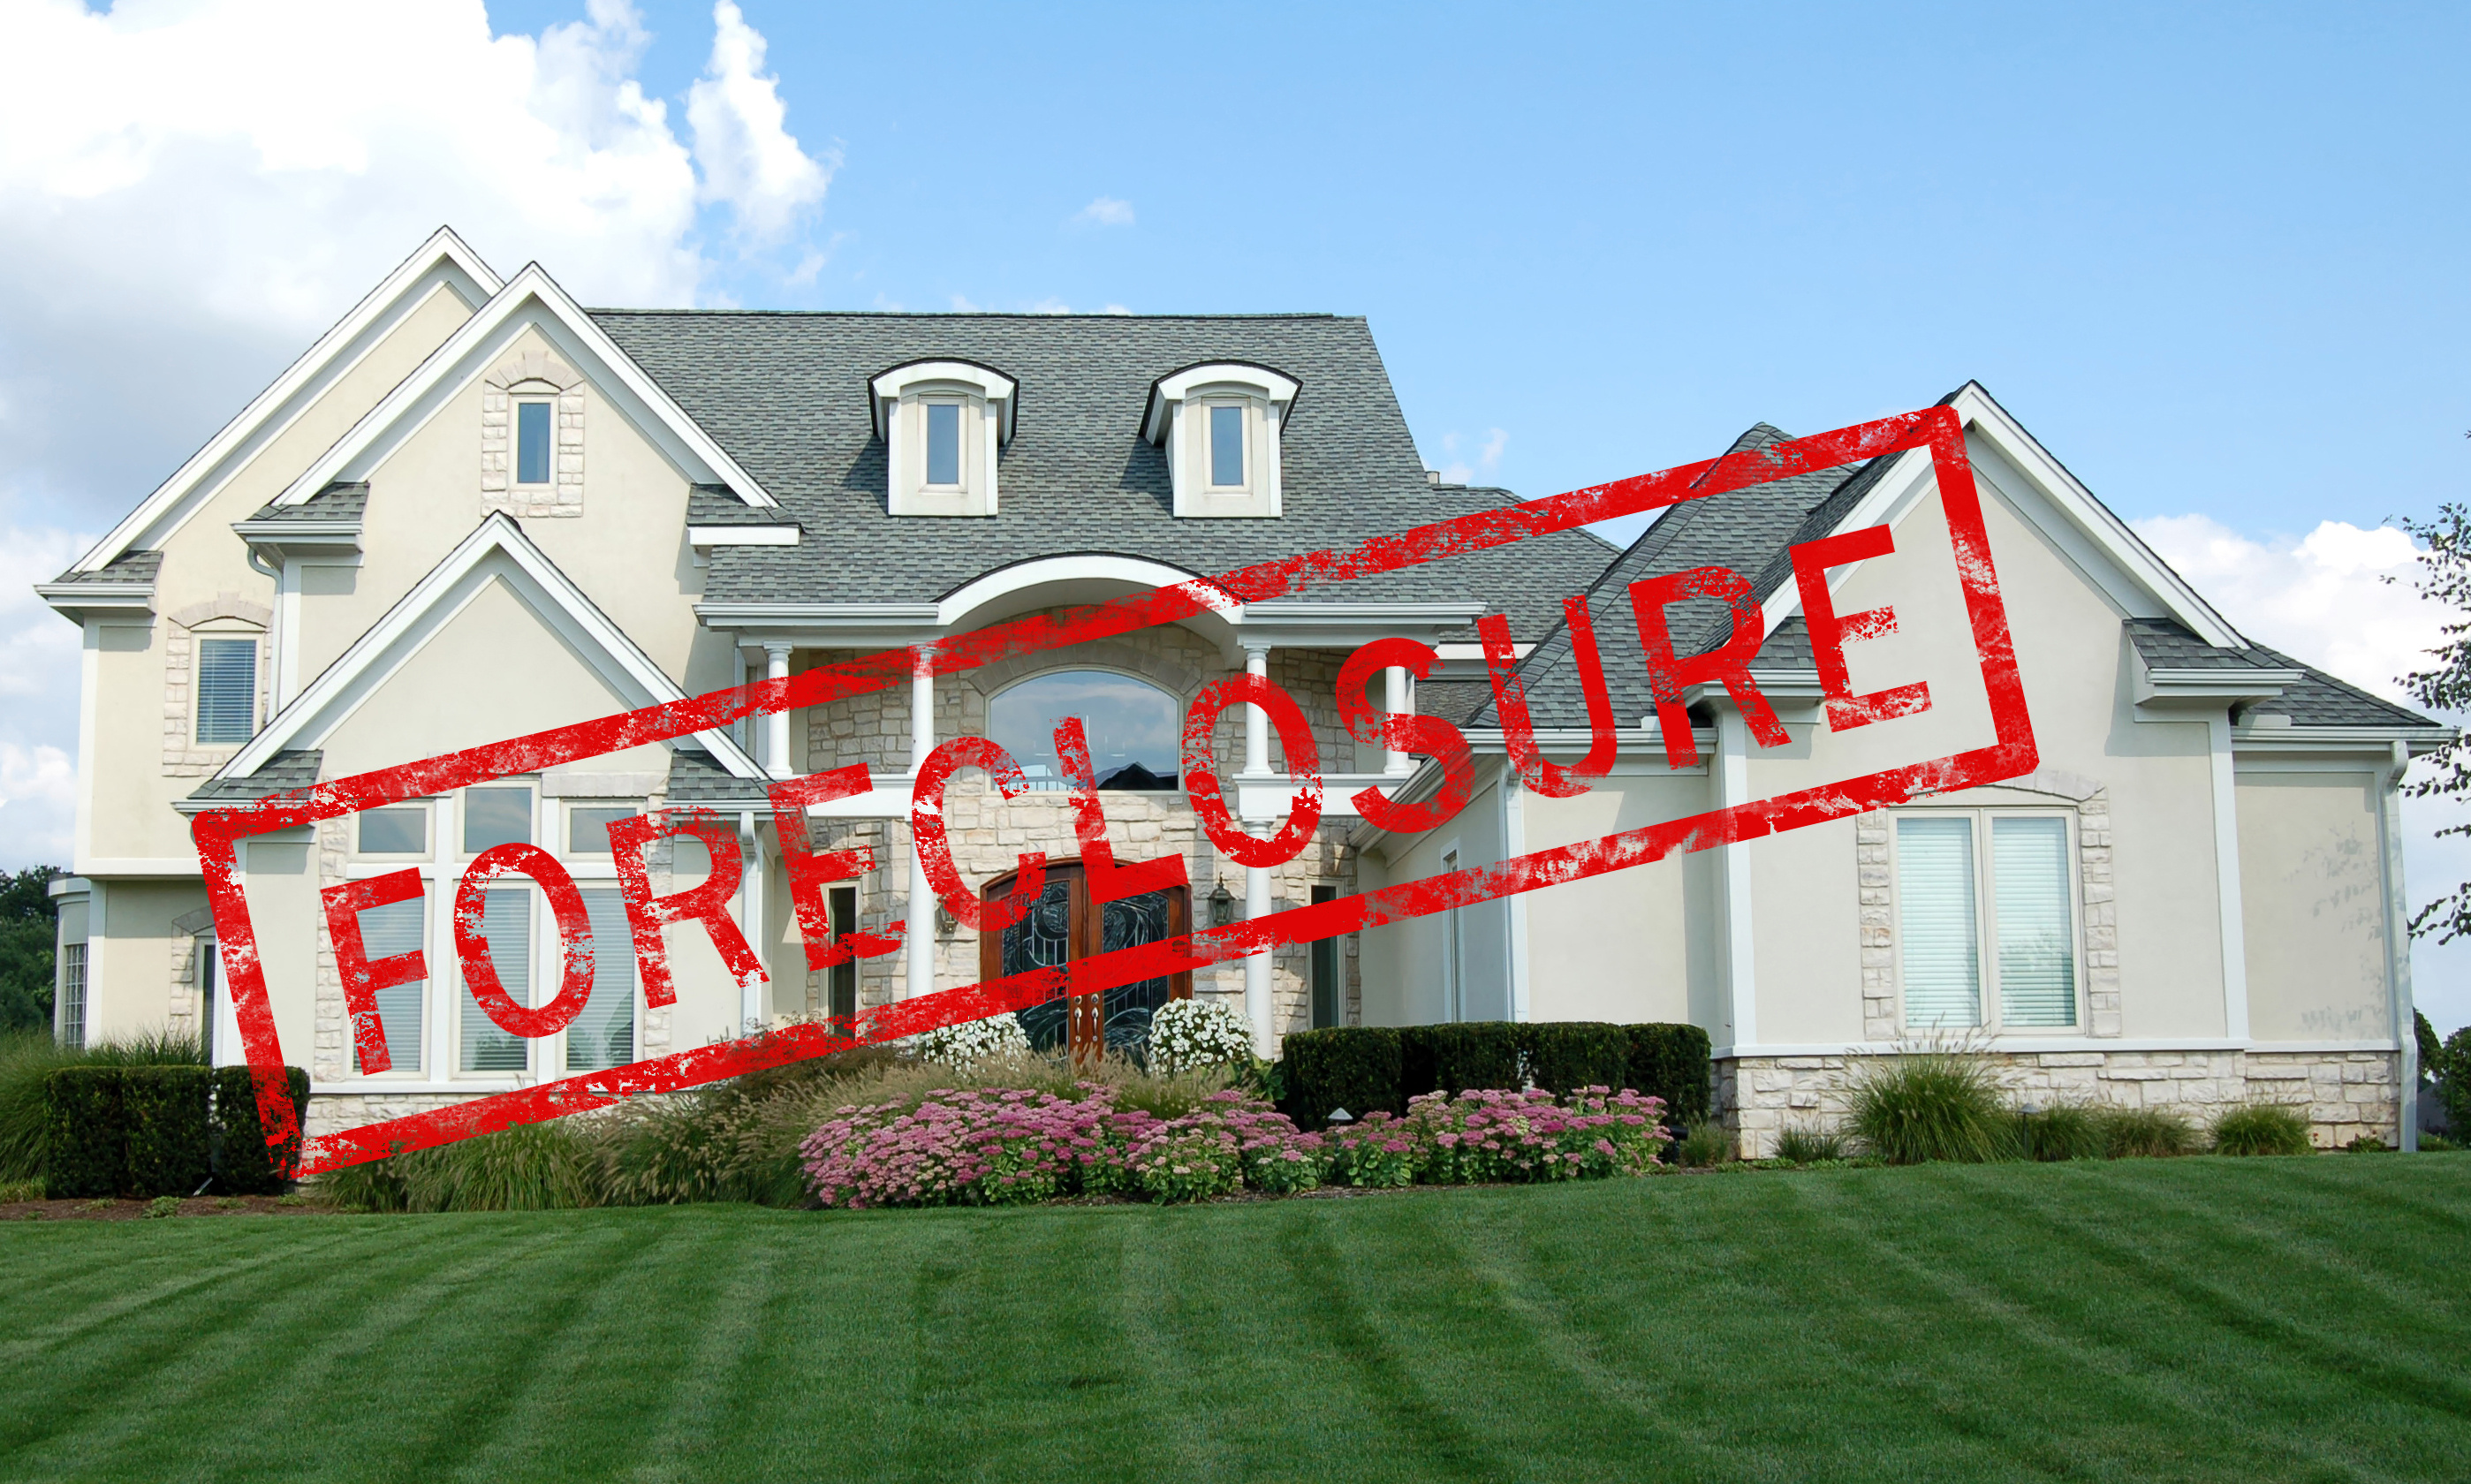 Call Salt Lake Appraising Company when you need valuations for Salt Lake foreclosures